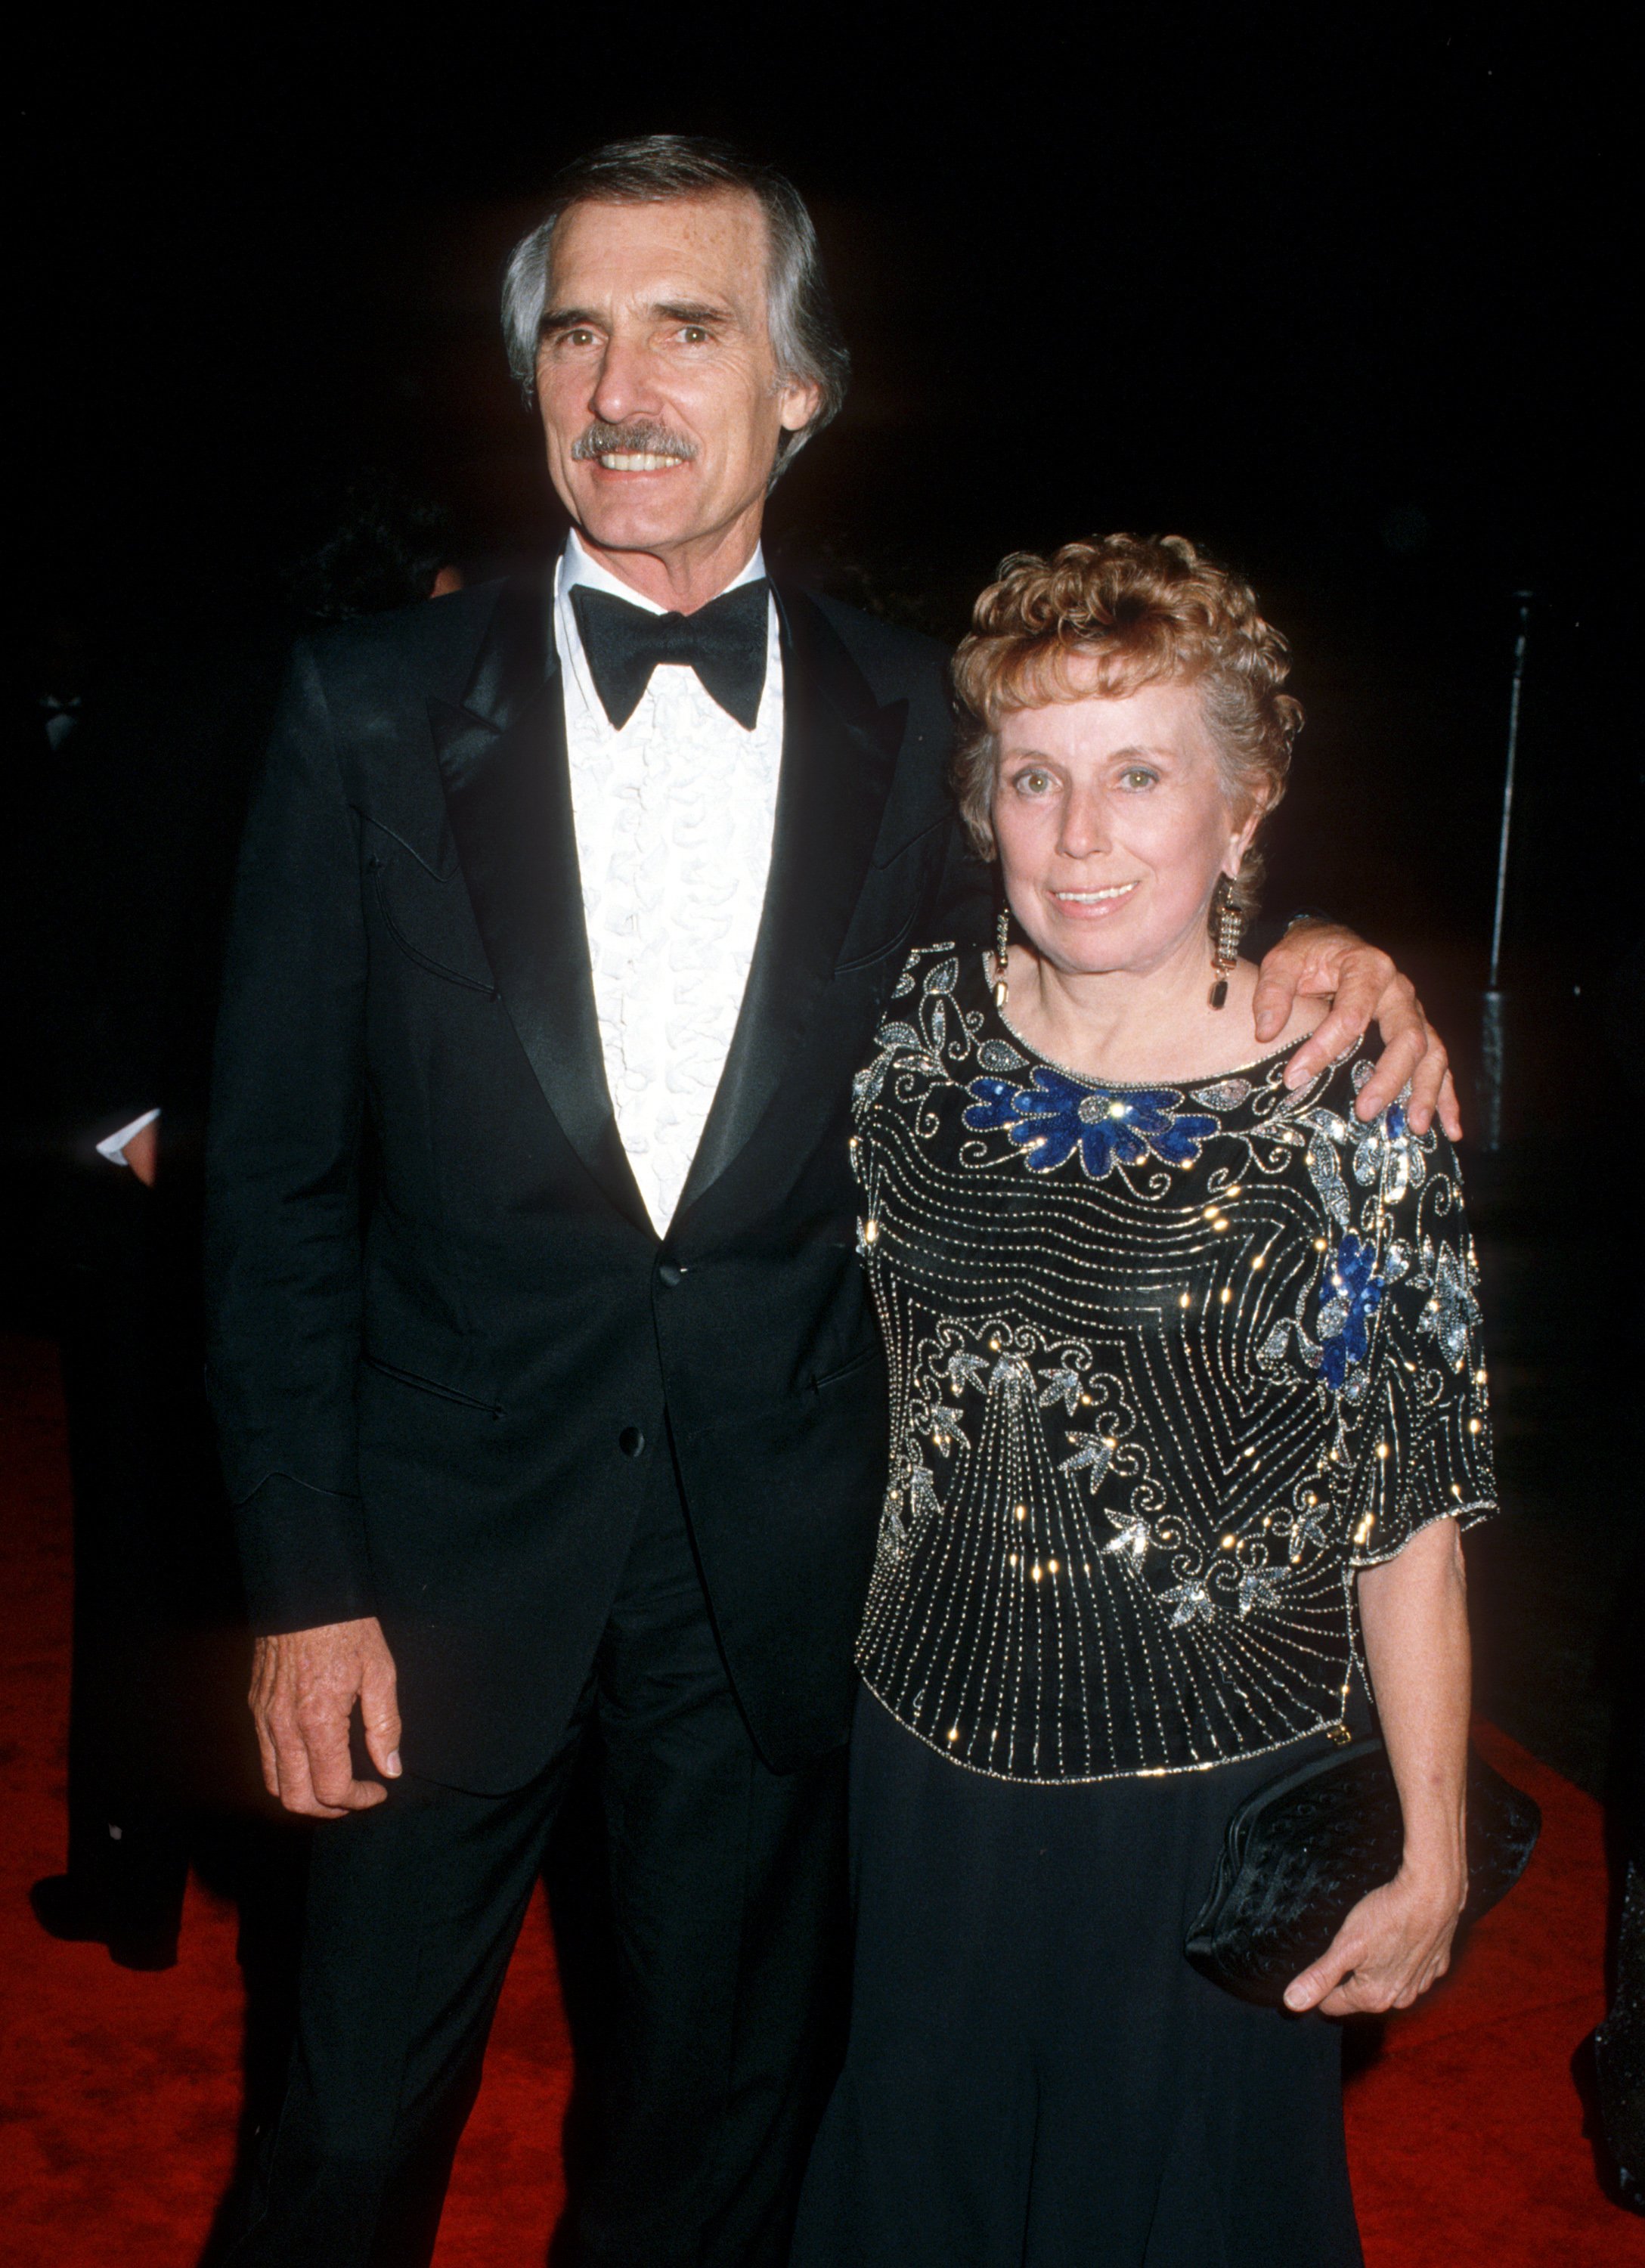 Dennis Weaver and Gerry Weaver during 6th TV Academy Hall of Fame Awards at FOX TV Studios in Hollywood, California. / Source: Getty Images